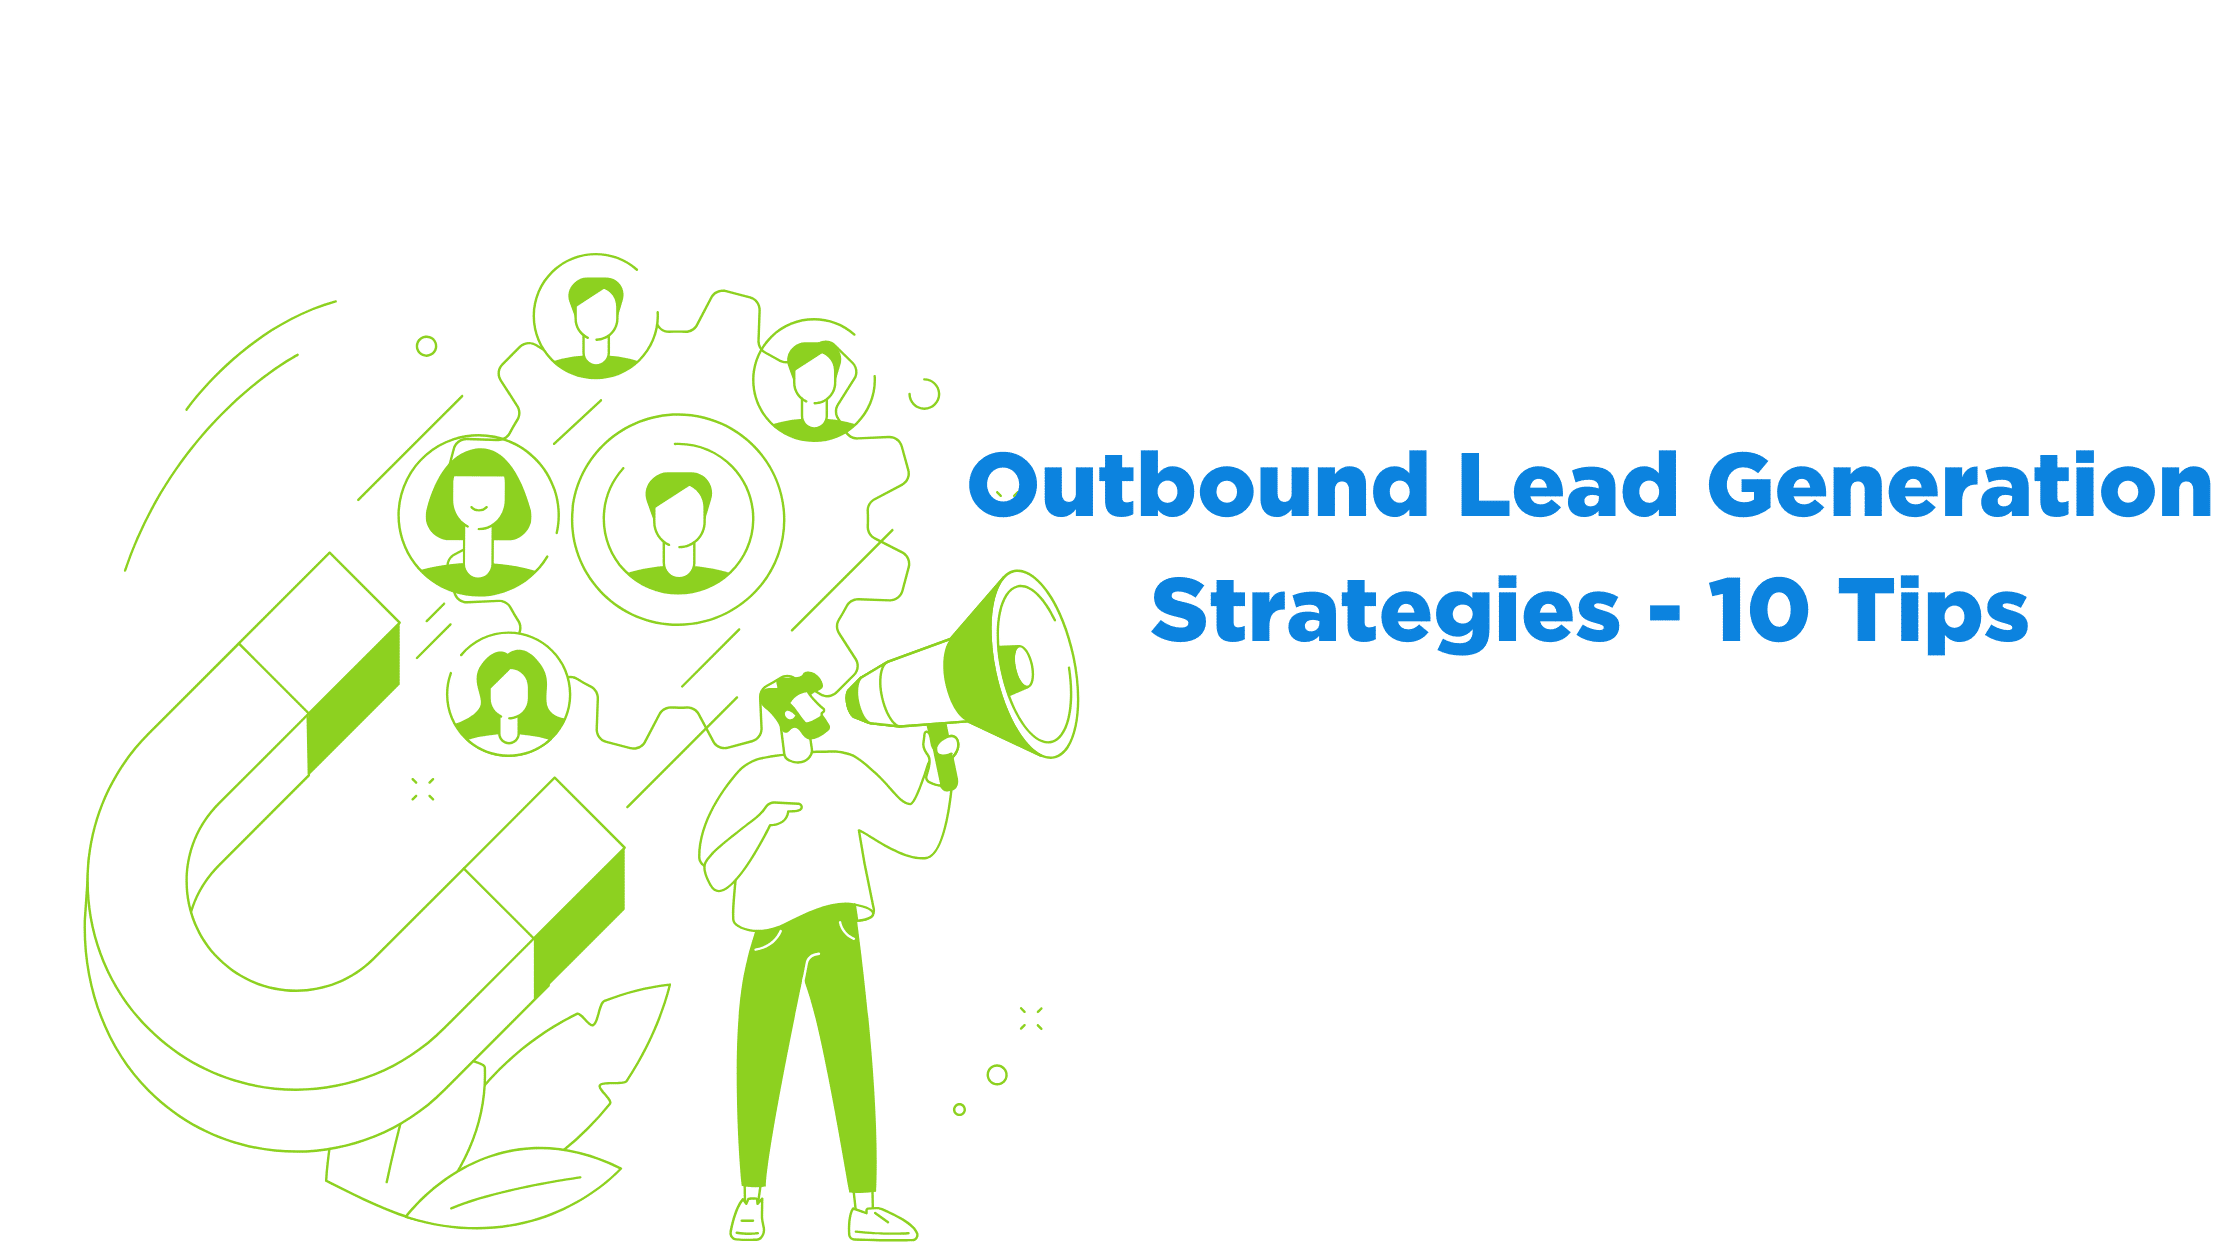 Outbound Lead Generation Strategies - 10 Best Tips